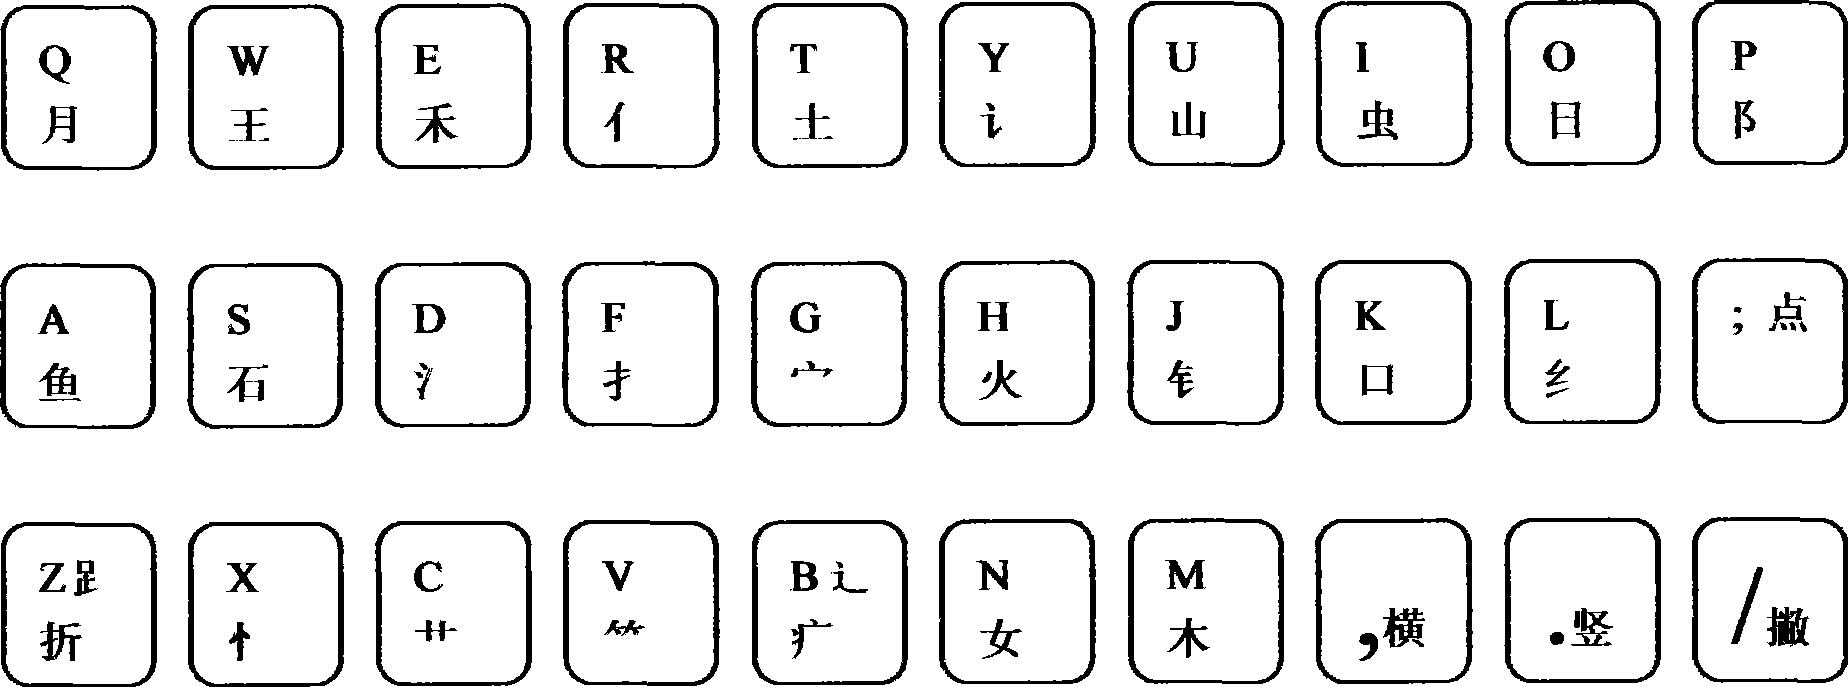 Perfect Chinese character code input method